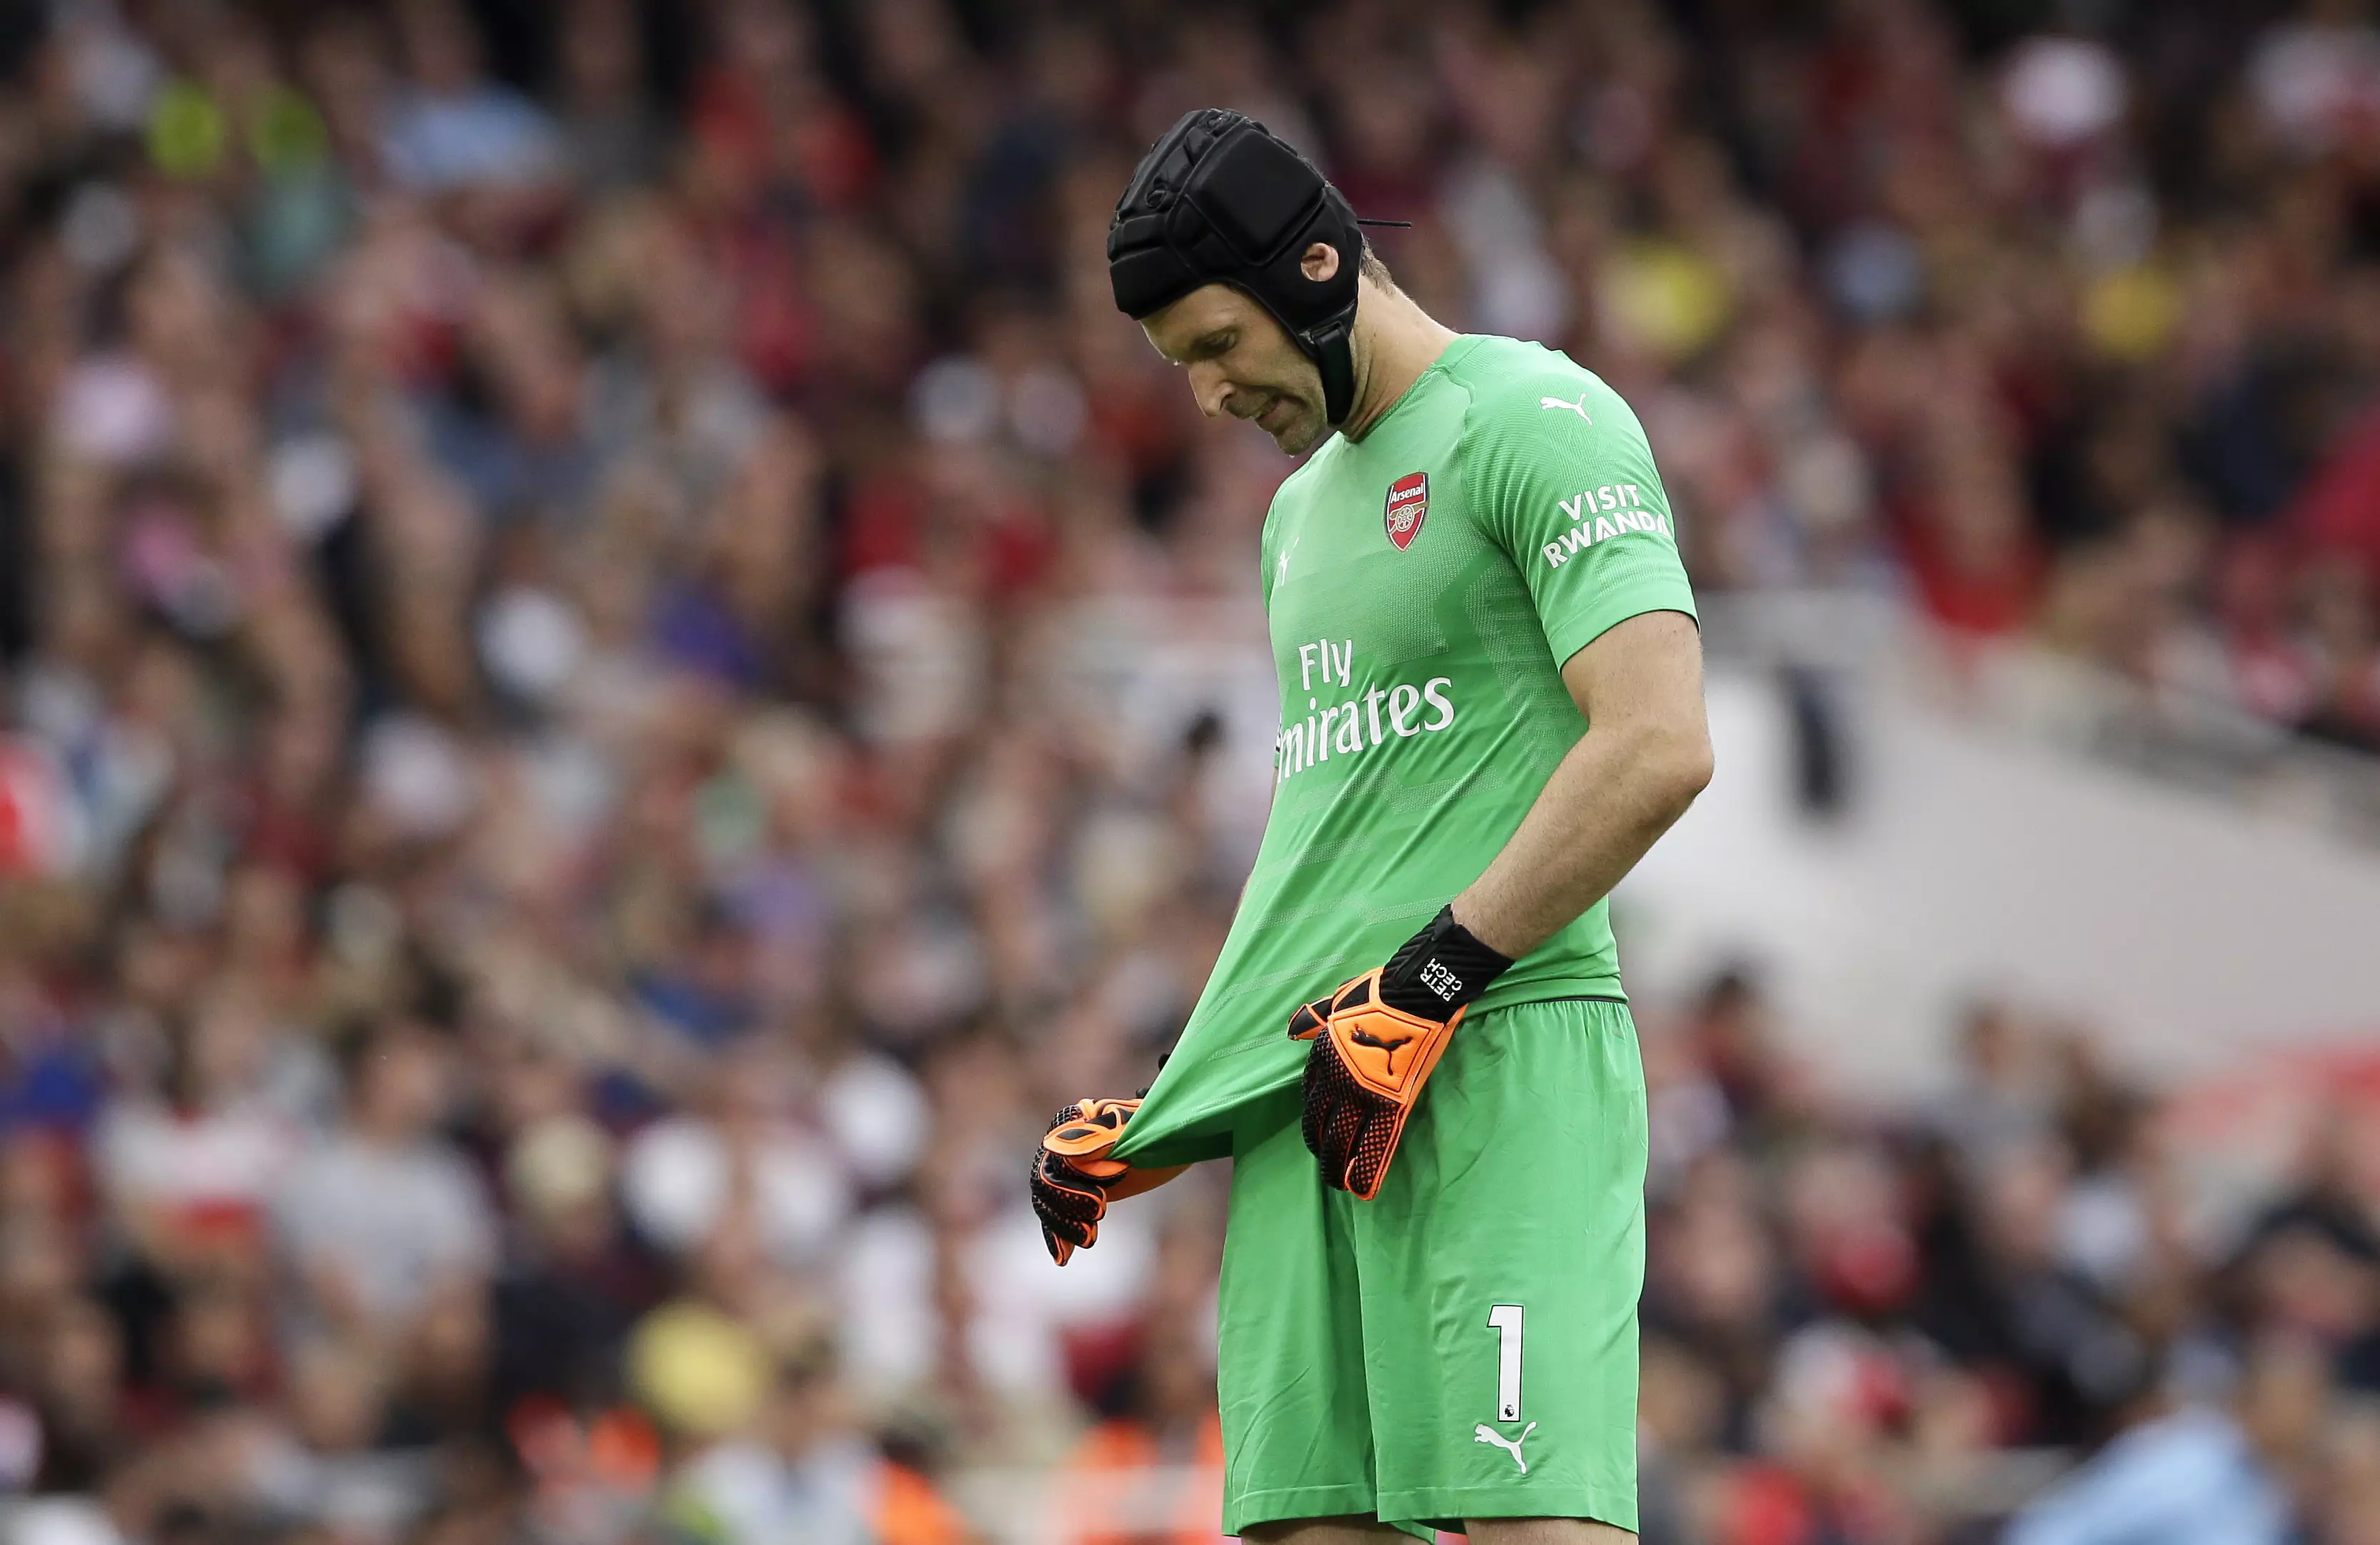 Cech didn't have a good time against City. Image: PA Images